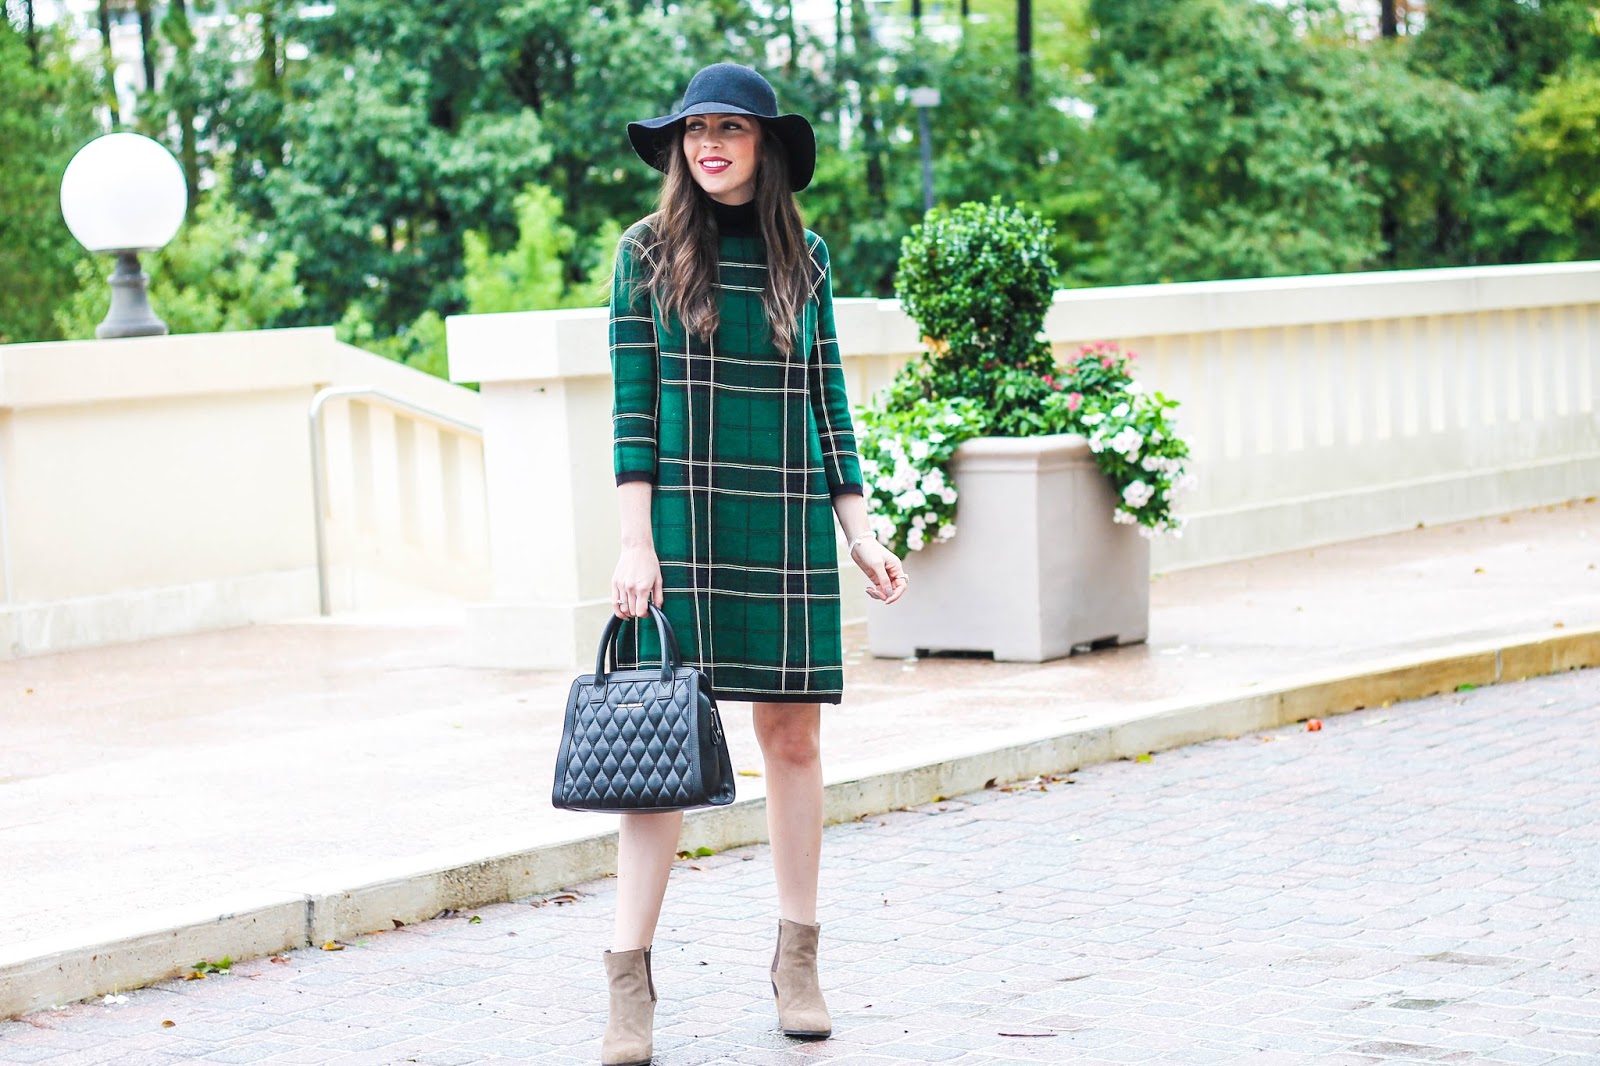 plaid sweater dress, fall outfit, fall style, asos plaid turtleneck dress, dark green dress, tan suede booties, sole society, ASOS, Vera Bradley, quilted leather satchel, black floppy hat, winter outfit, trends for fall, fashion blogger, raleigh, north carolina blogger